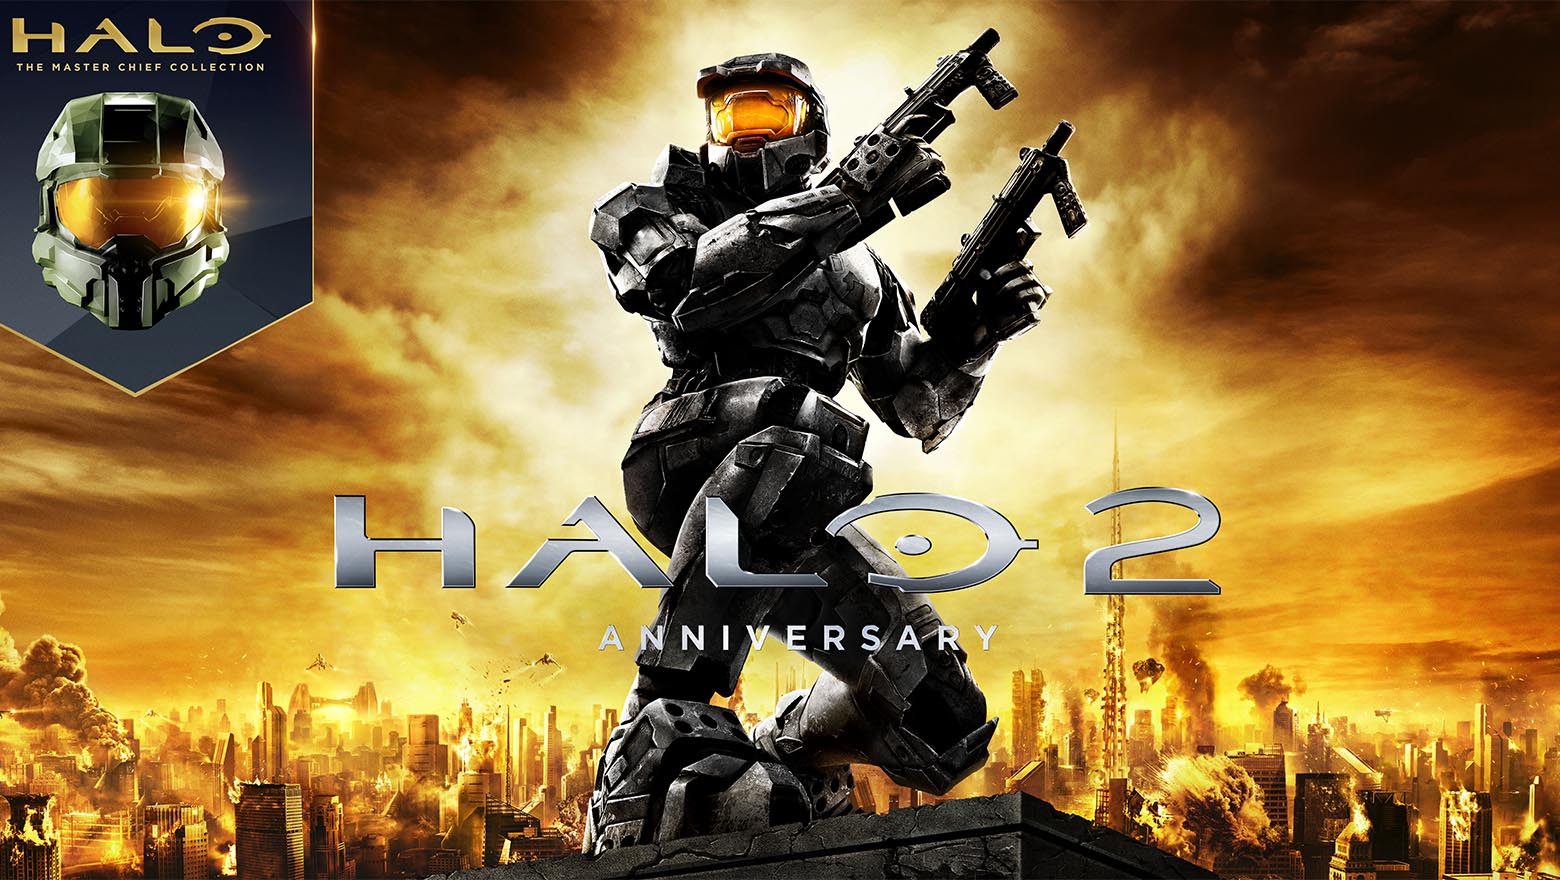 Halo 2: Anniversary now available for PC as part of Master Chief Collection  | Windows Experience Blog